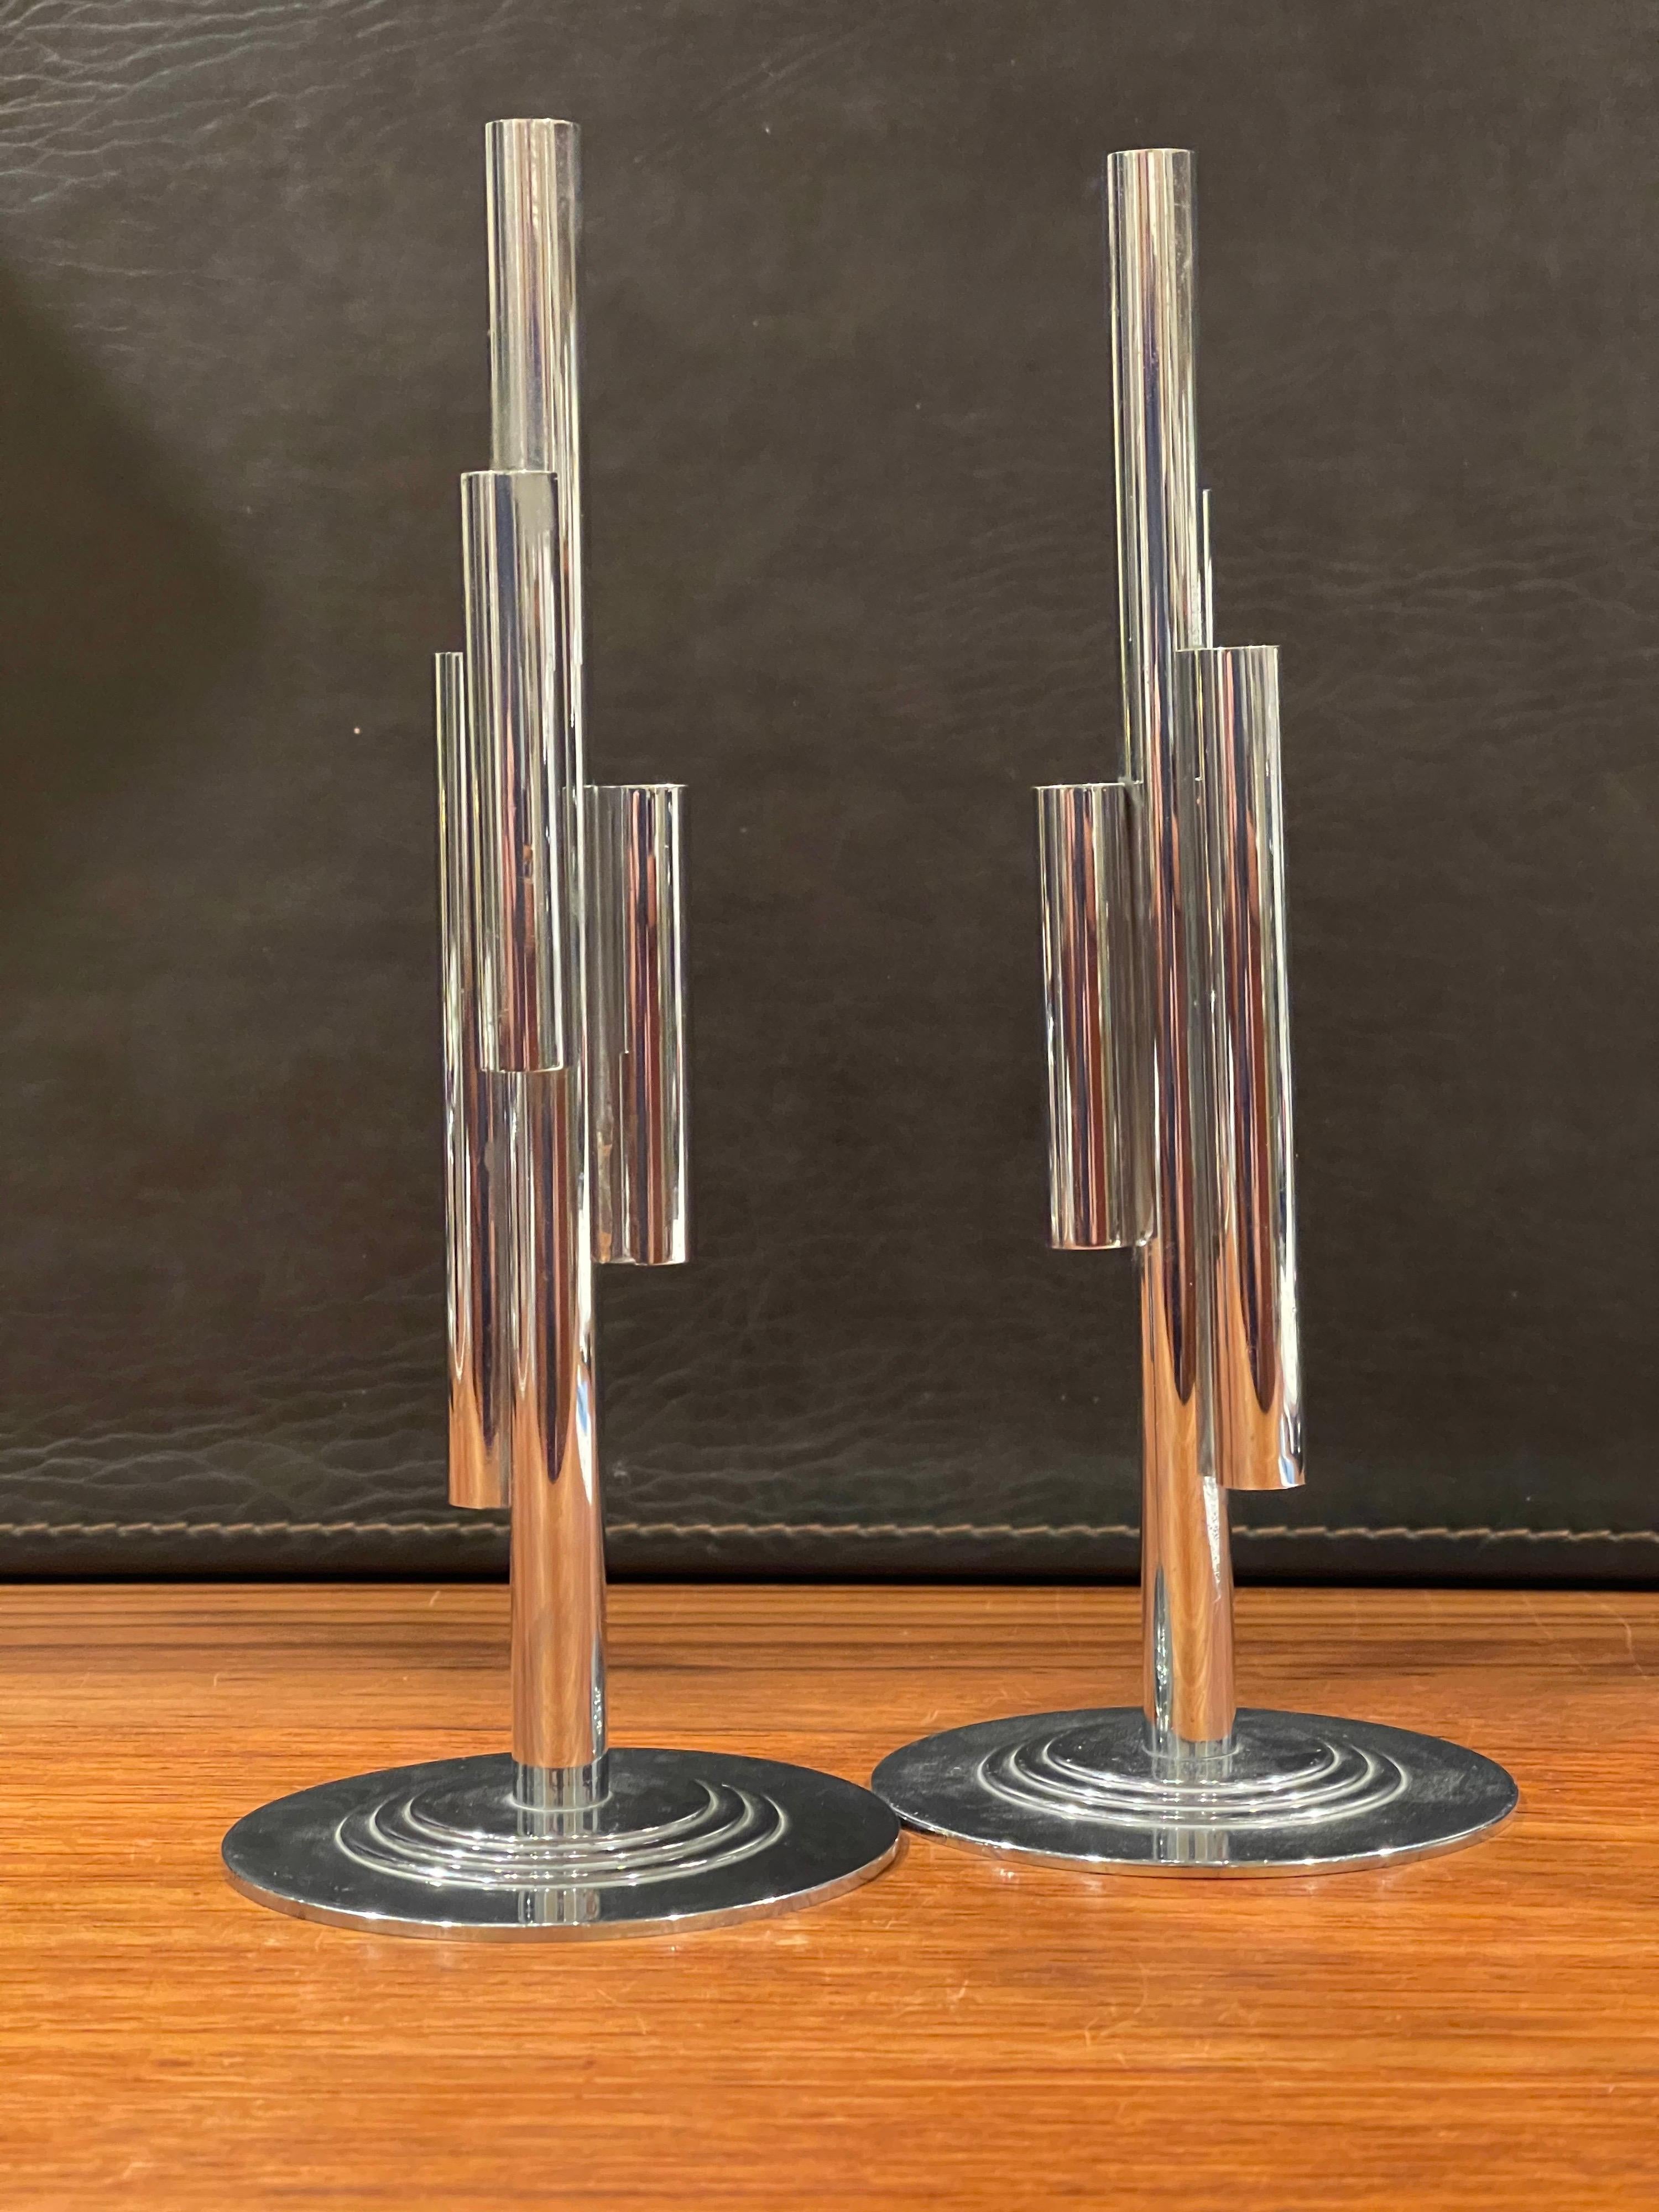 Pair of Art Deco Tubular Chrome Bud Vases by Ruth & William Gerth for Chase Co For Sale 3